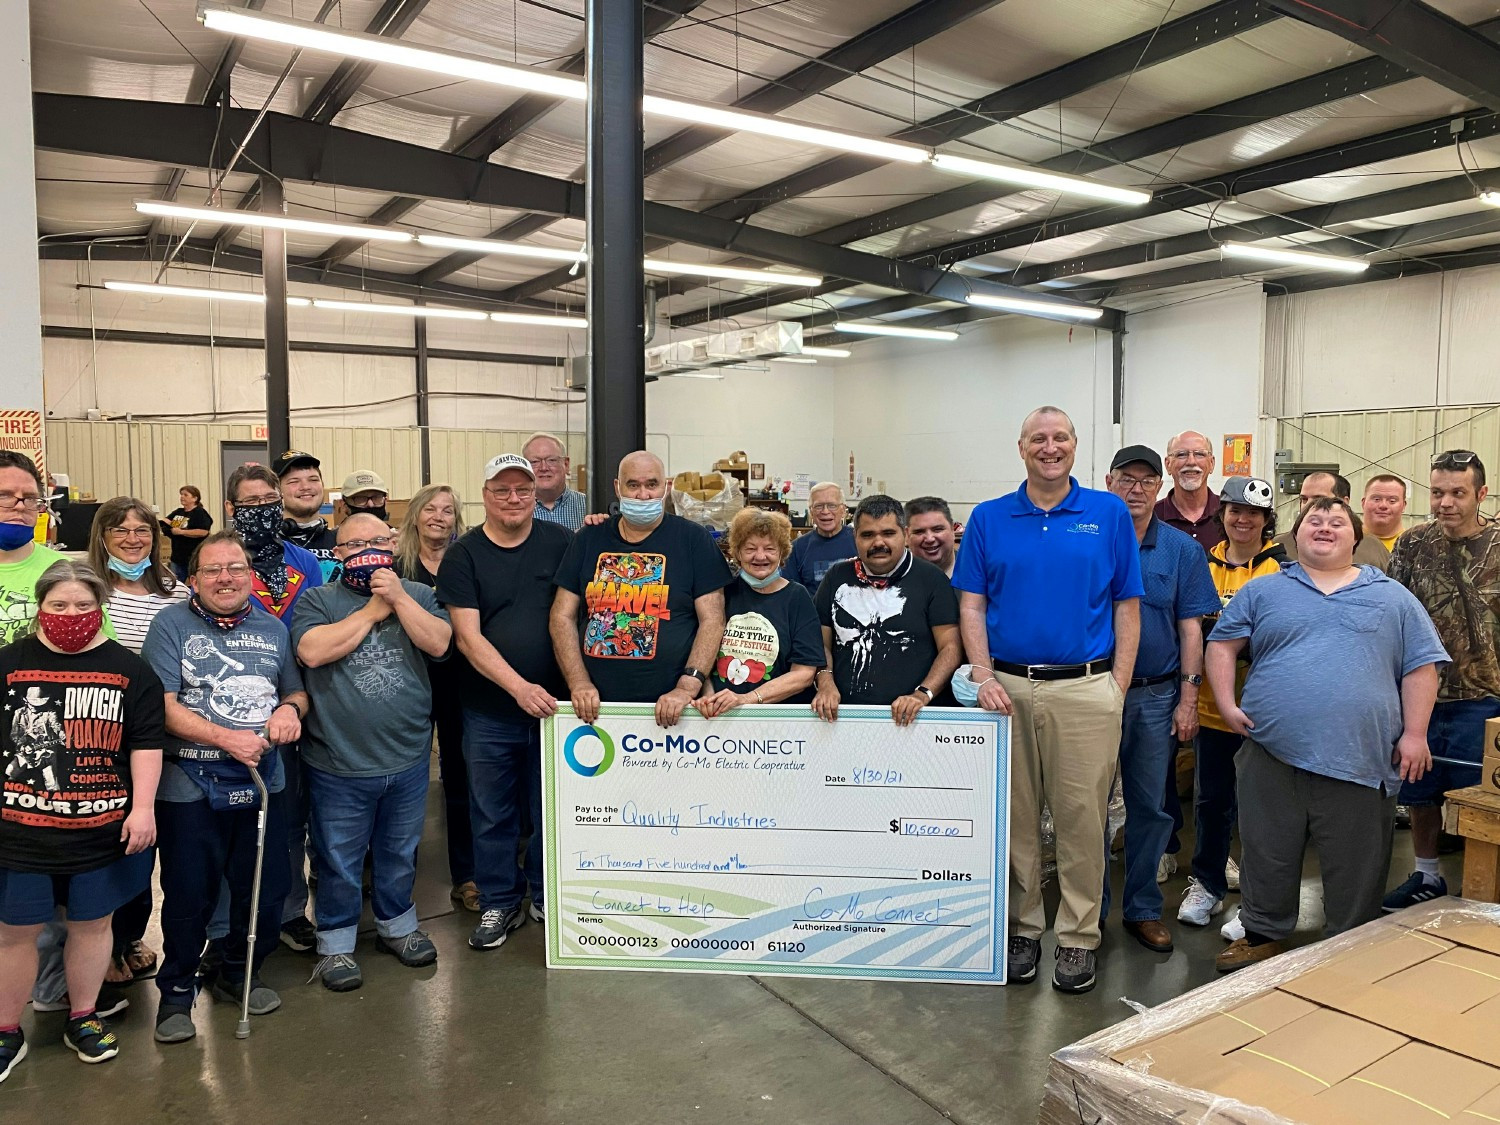 Co-Mo Connect presents a Connect to Help donation check to Quality Industries Sheltered Workshop of Versailles, MO. 